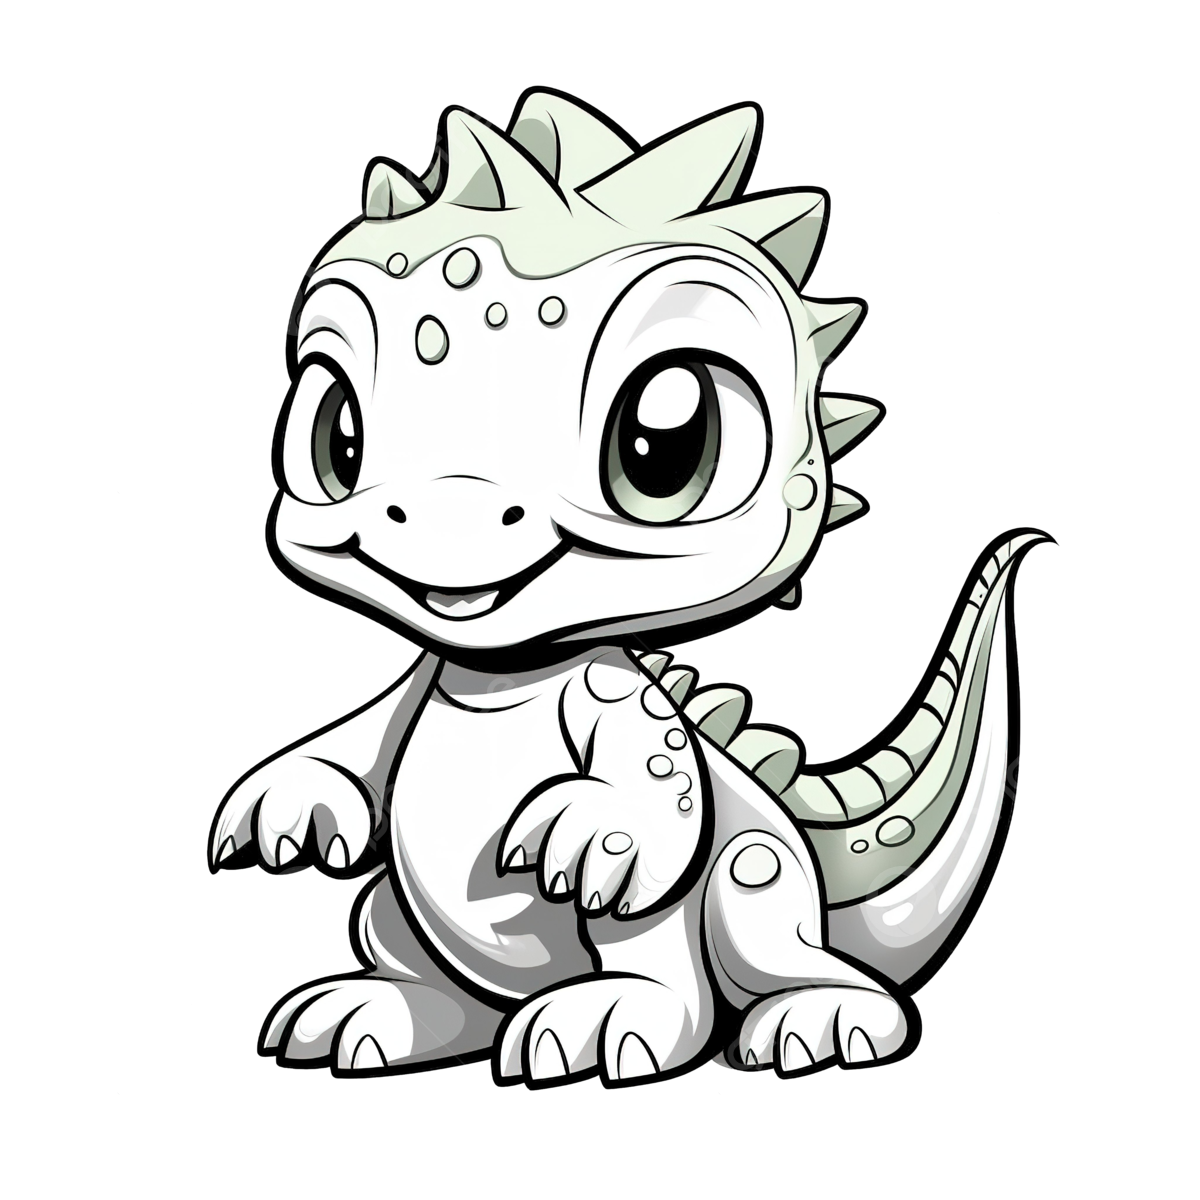 Dinosaur cartoon doodle kawaii anime coloring page cute illustration drawing clipart character chibi manga ics car drawing anime drawing cartoon drawing png transparent image and clipart for free download